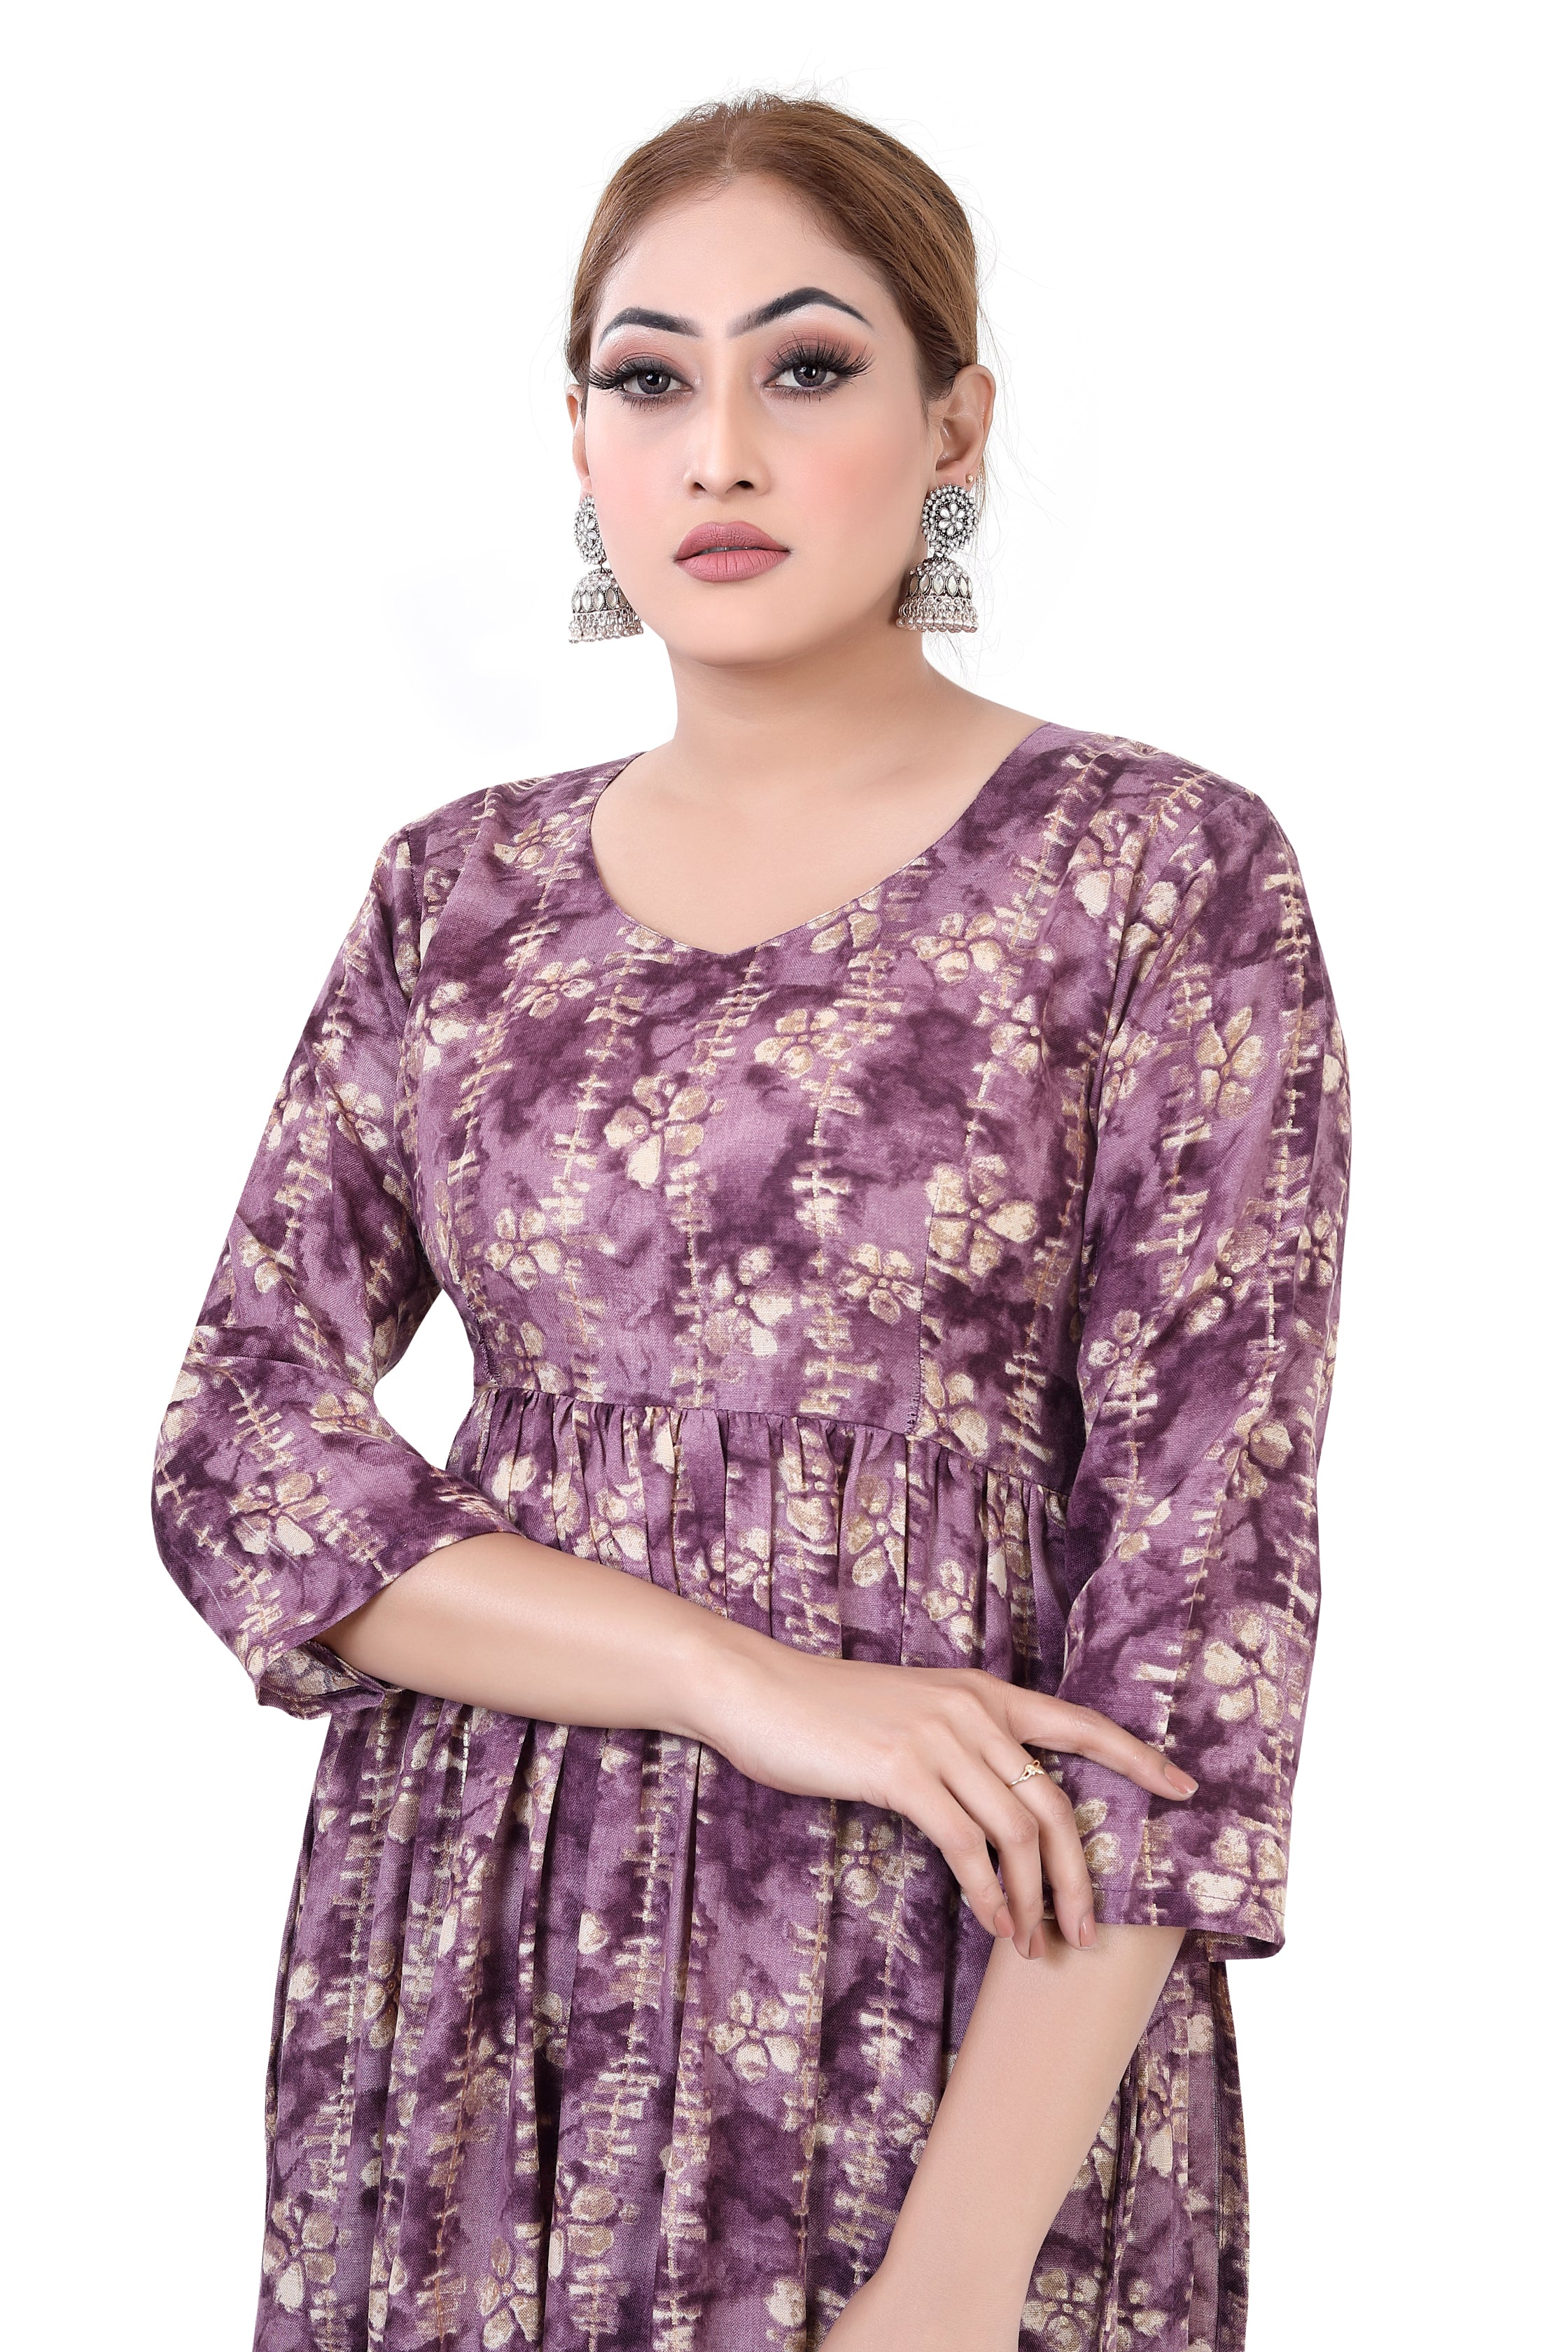 PInk Printed Kurti Plazzo Set - Premium Festive Wear from Dulhan Exclusives - Just $75! Shop now at Dulhan Exclusives